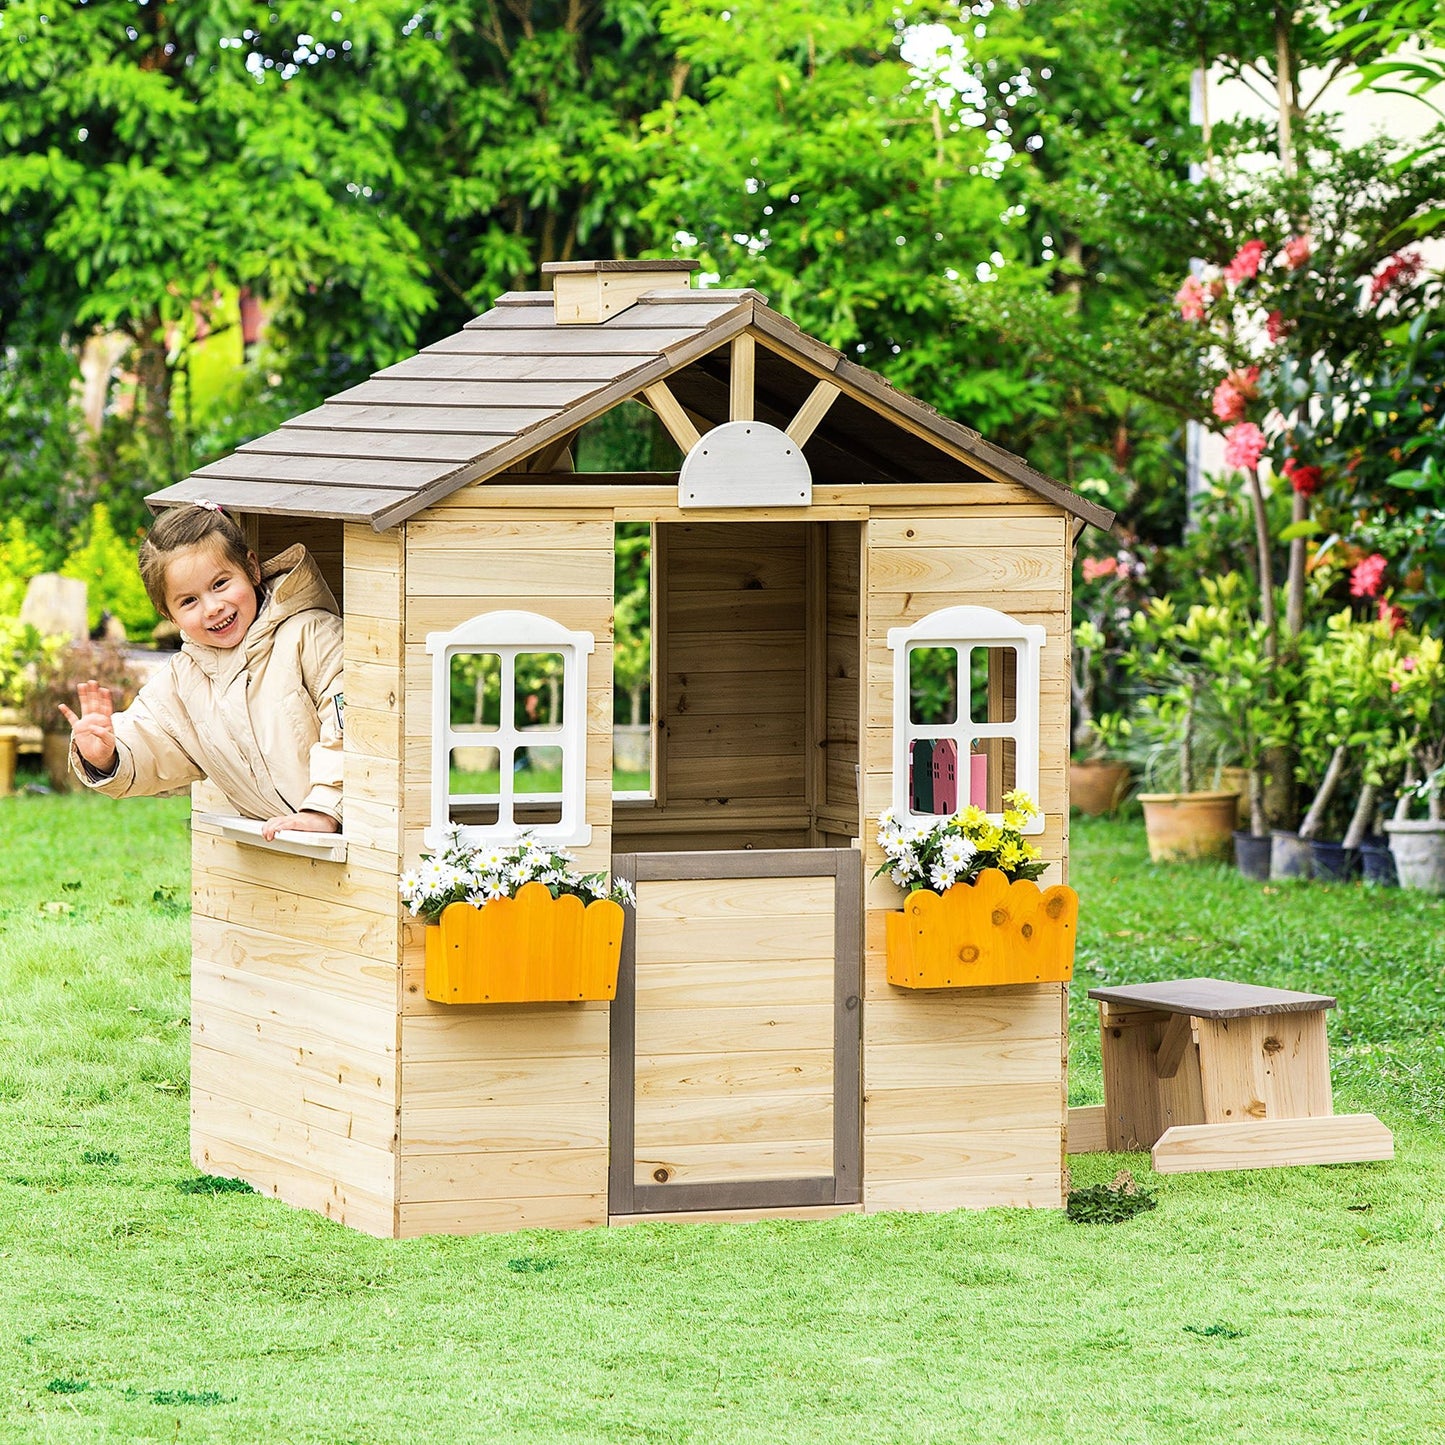 Toys and Games-Wooden Kids Playhouse, Outdoor Garden Pretend Play Games, Adventures Cottage, with Working Door, Service Station, Flowers Pot Holder - Outdoor Style Company